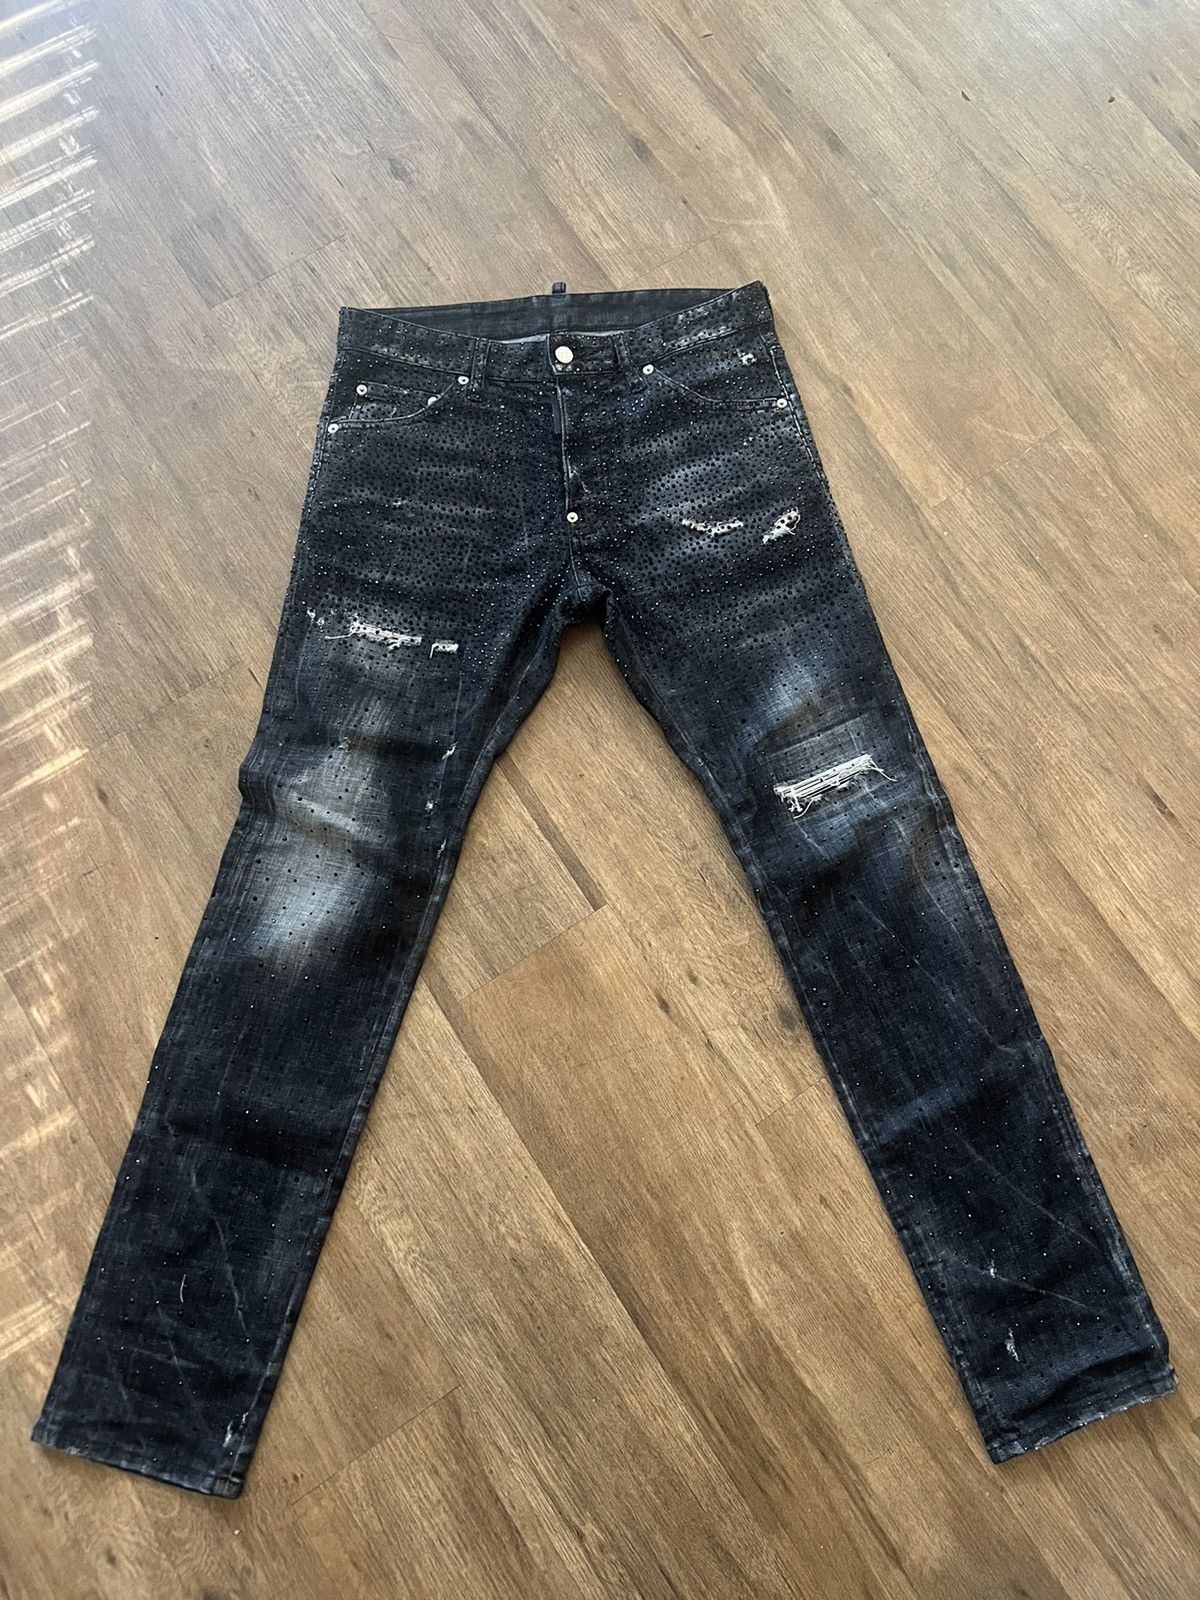 Dsquared2 Dsquared BLACK DARK GALAXY WASH COOL GUY JEANS | Grailed